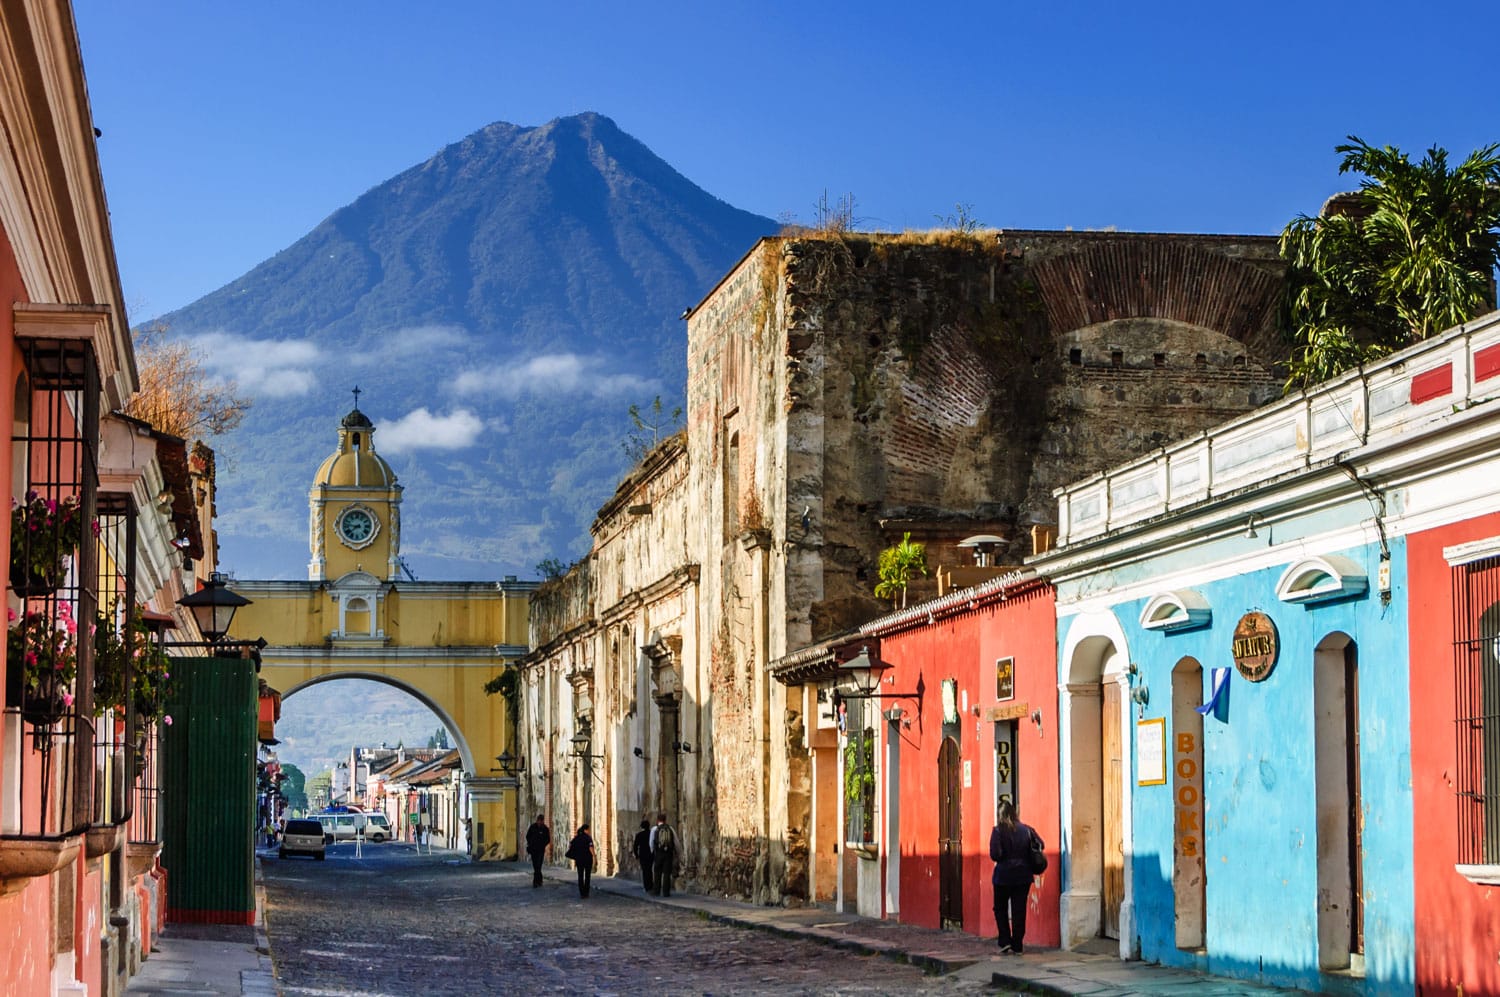 Agua volcano behind Santa Catalina Arch in the colonial town of Antigua, Guatemala